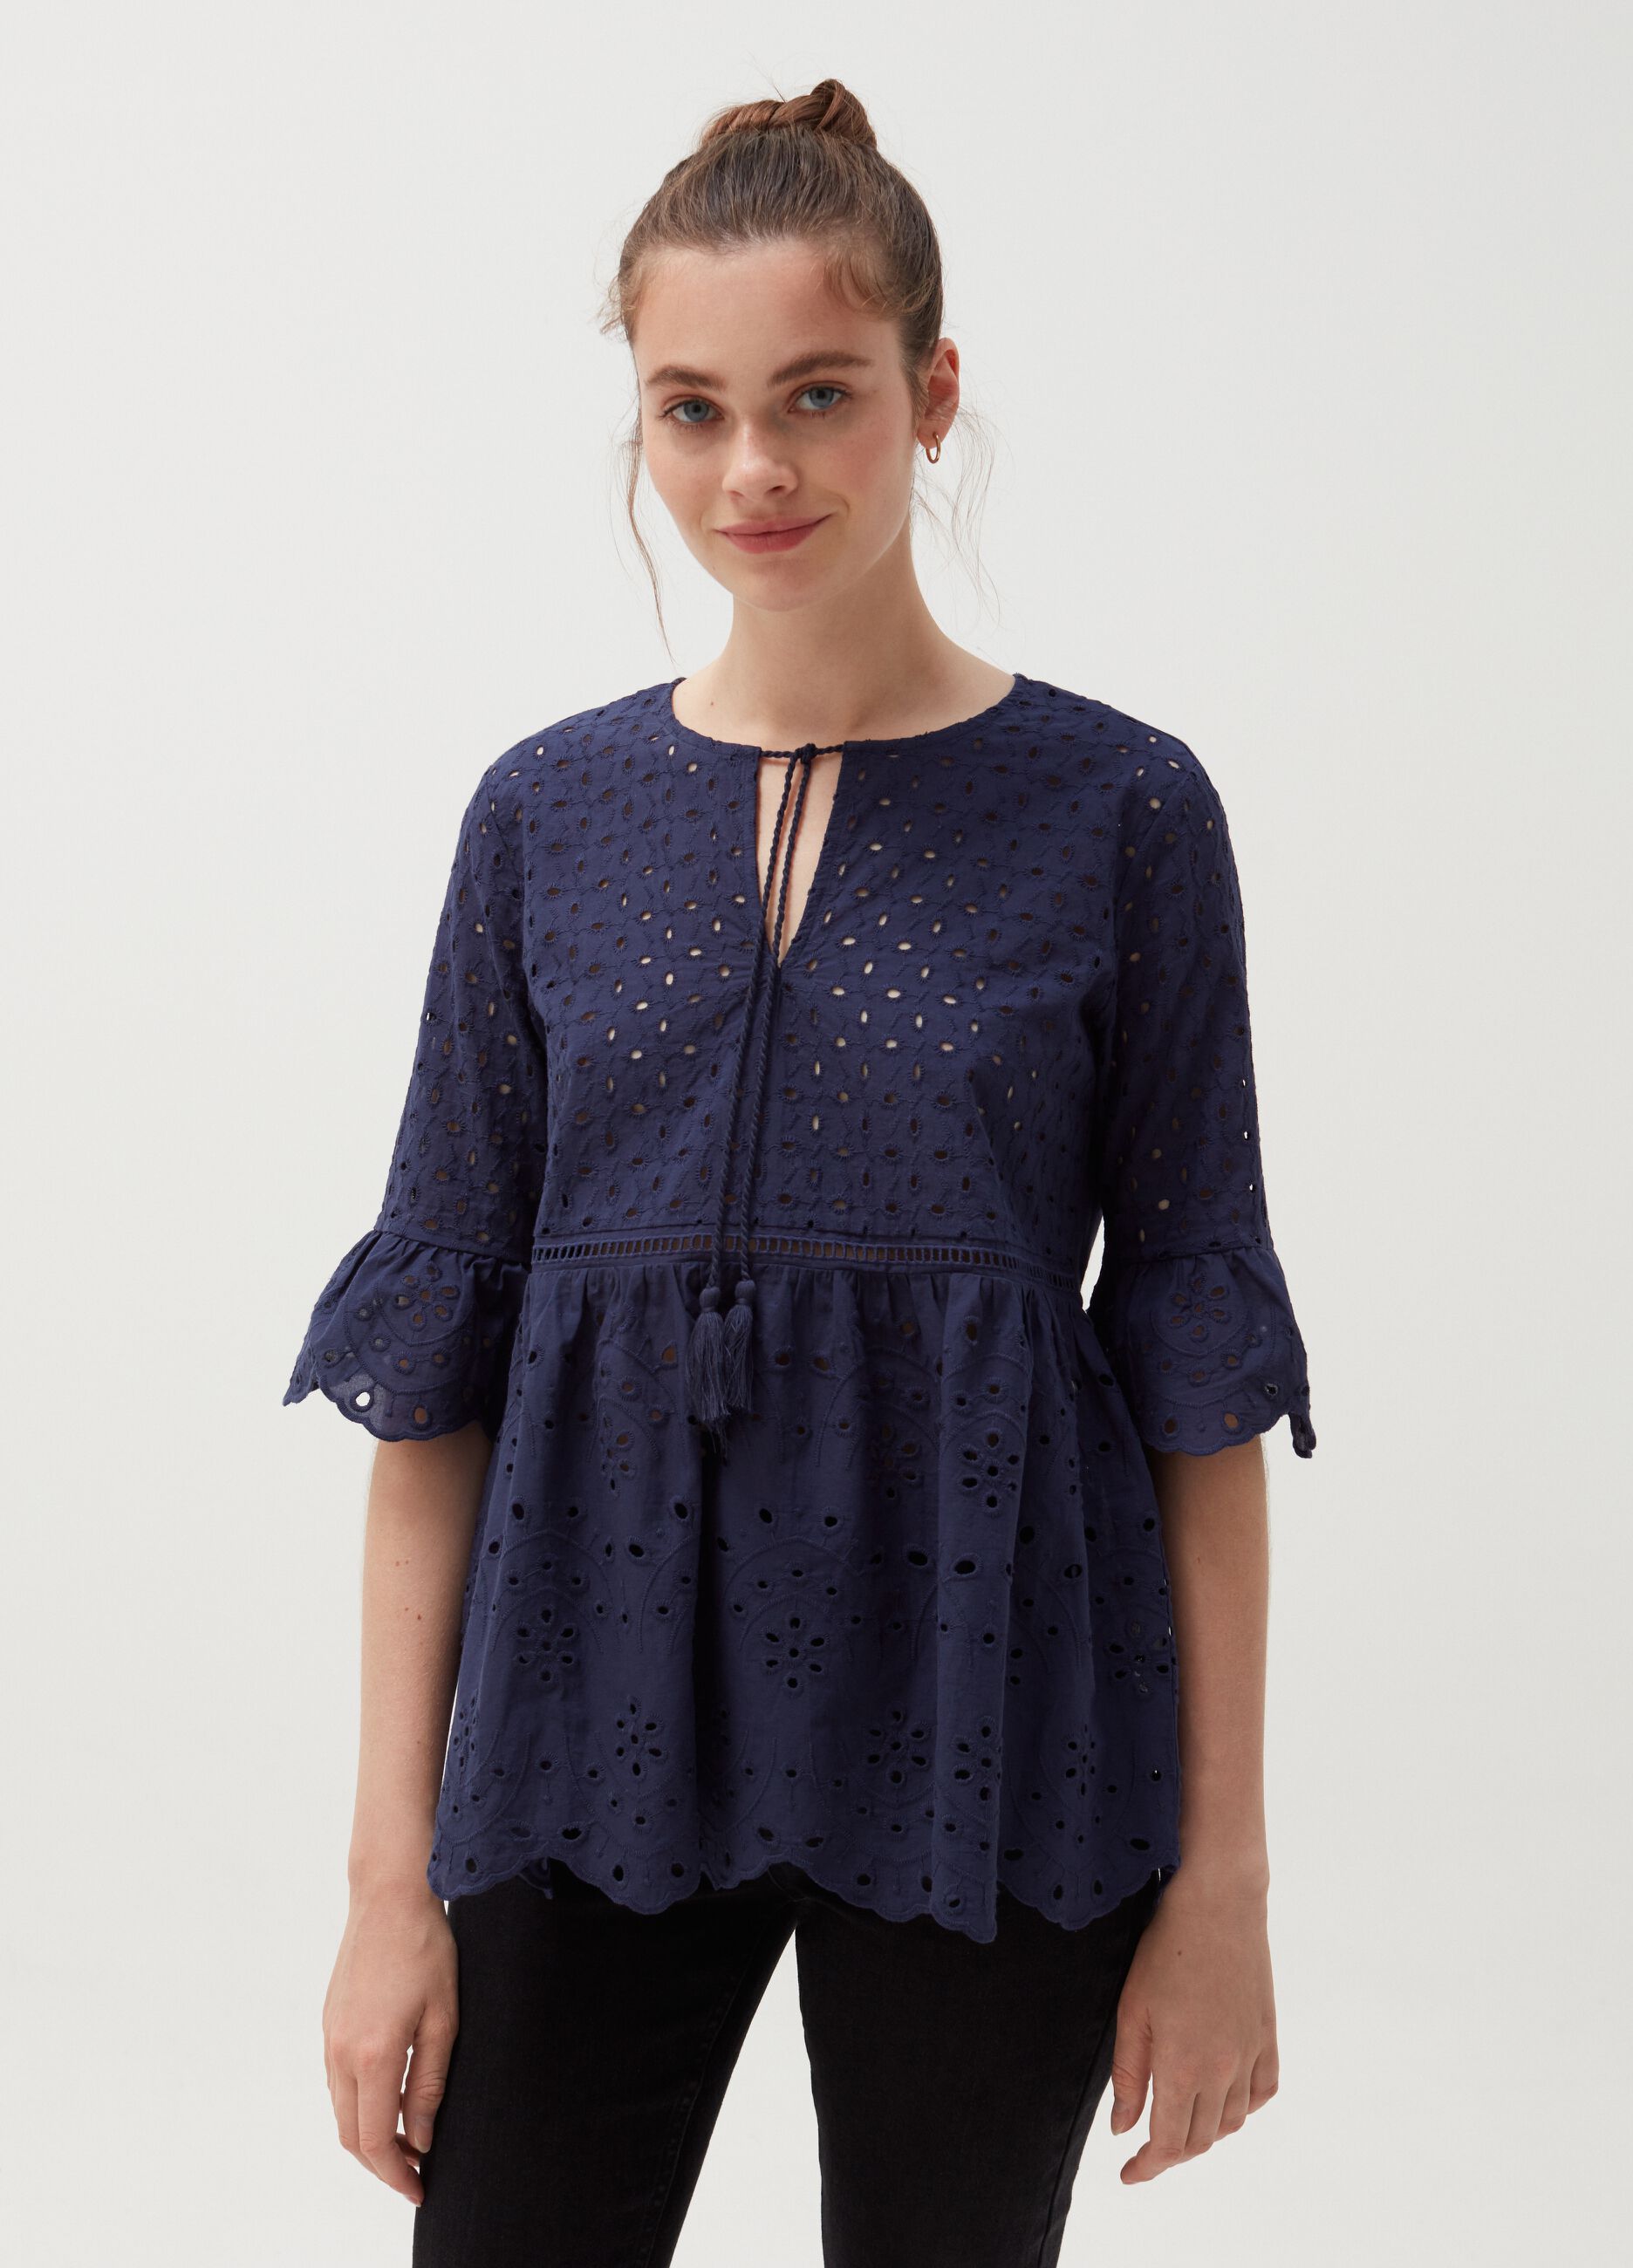 Broderie anglaise lace blouse with tassels